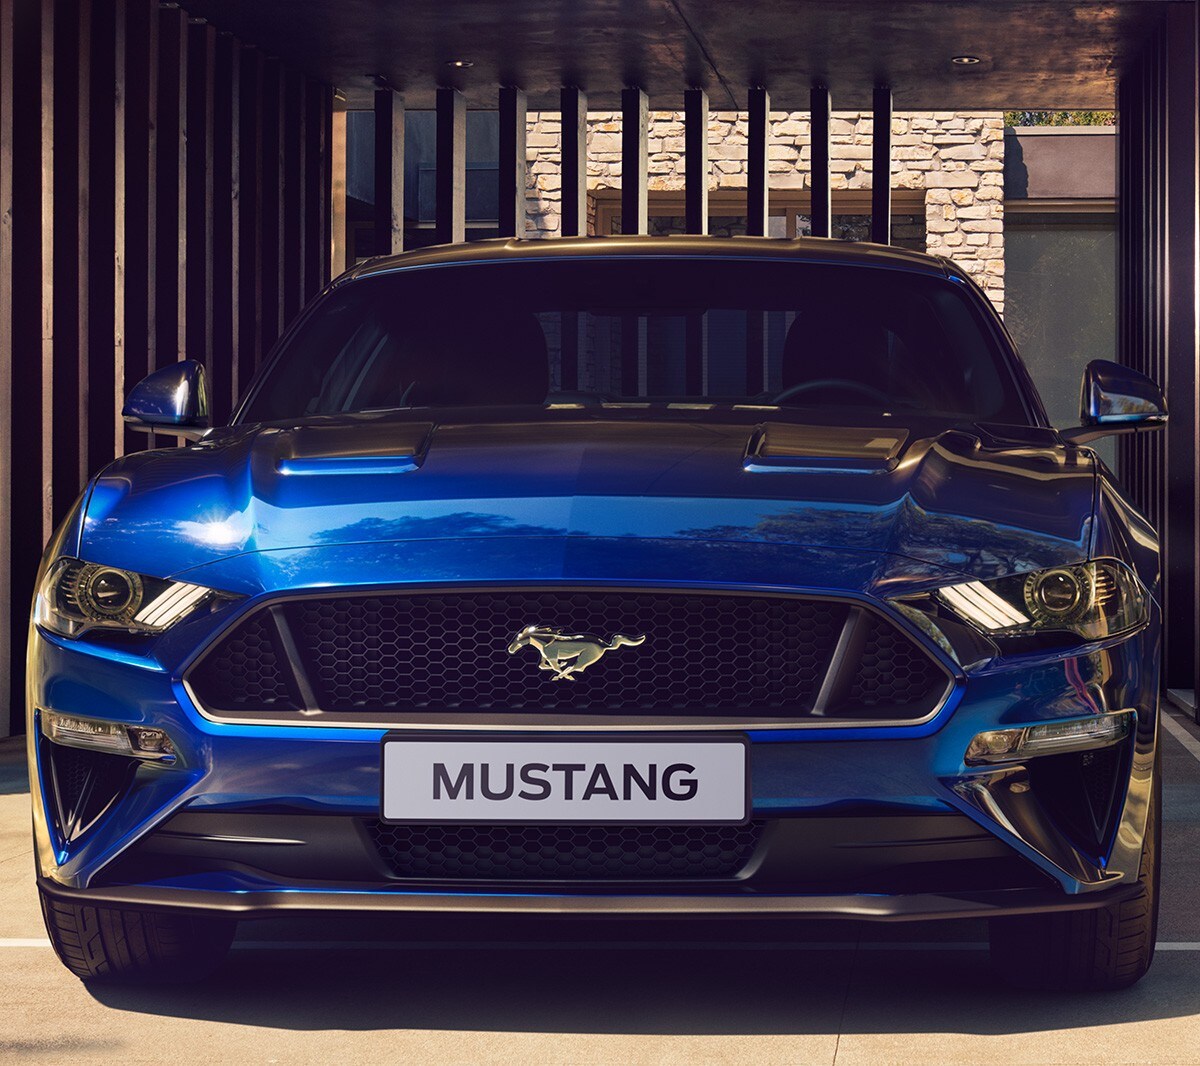 Blue Ford Mustang GT parked by grill gate